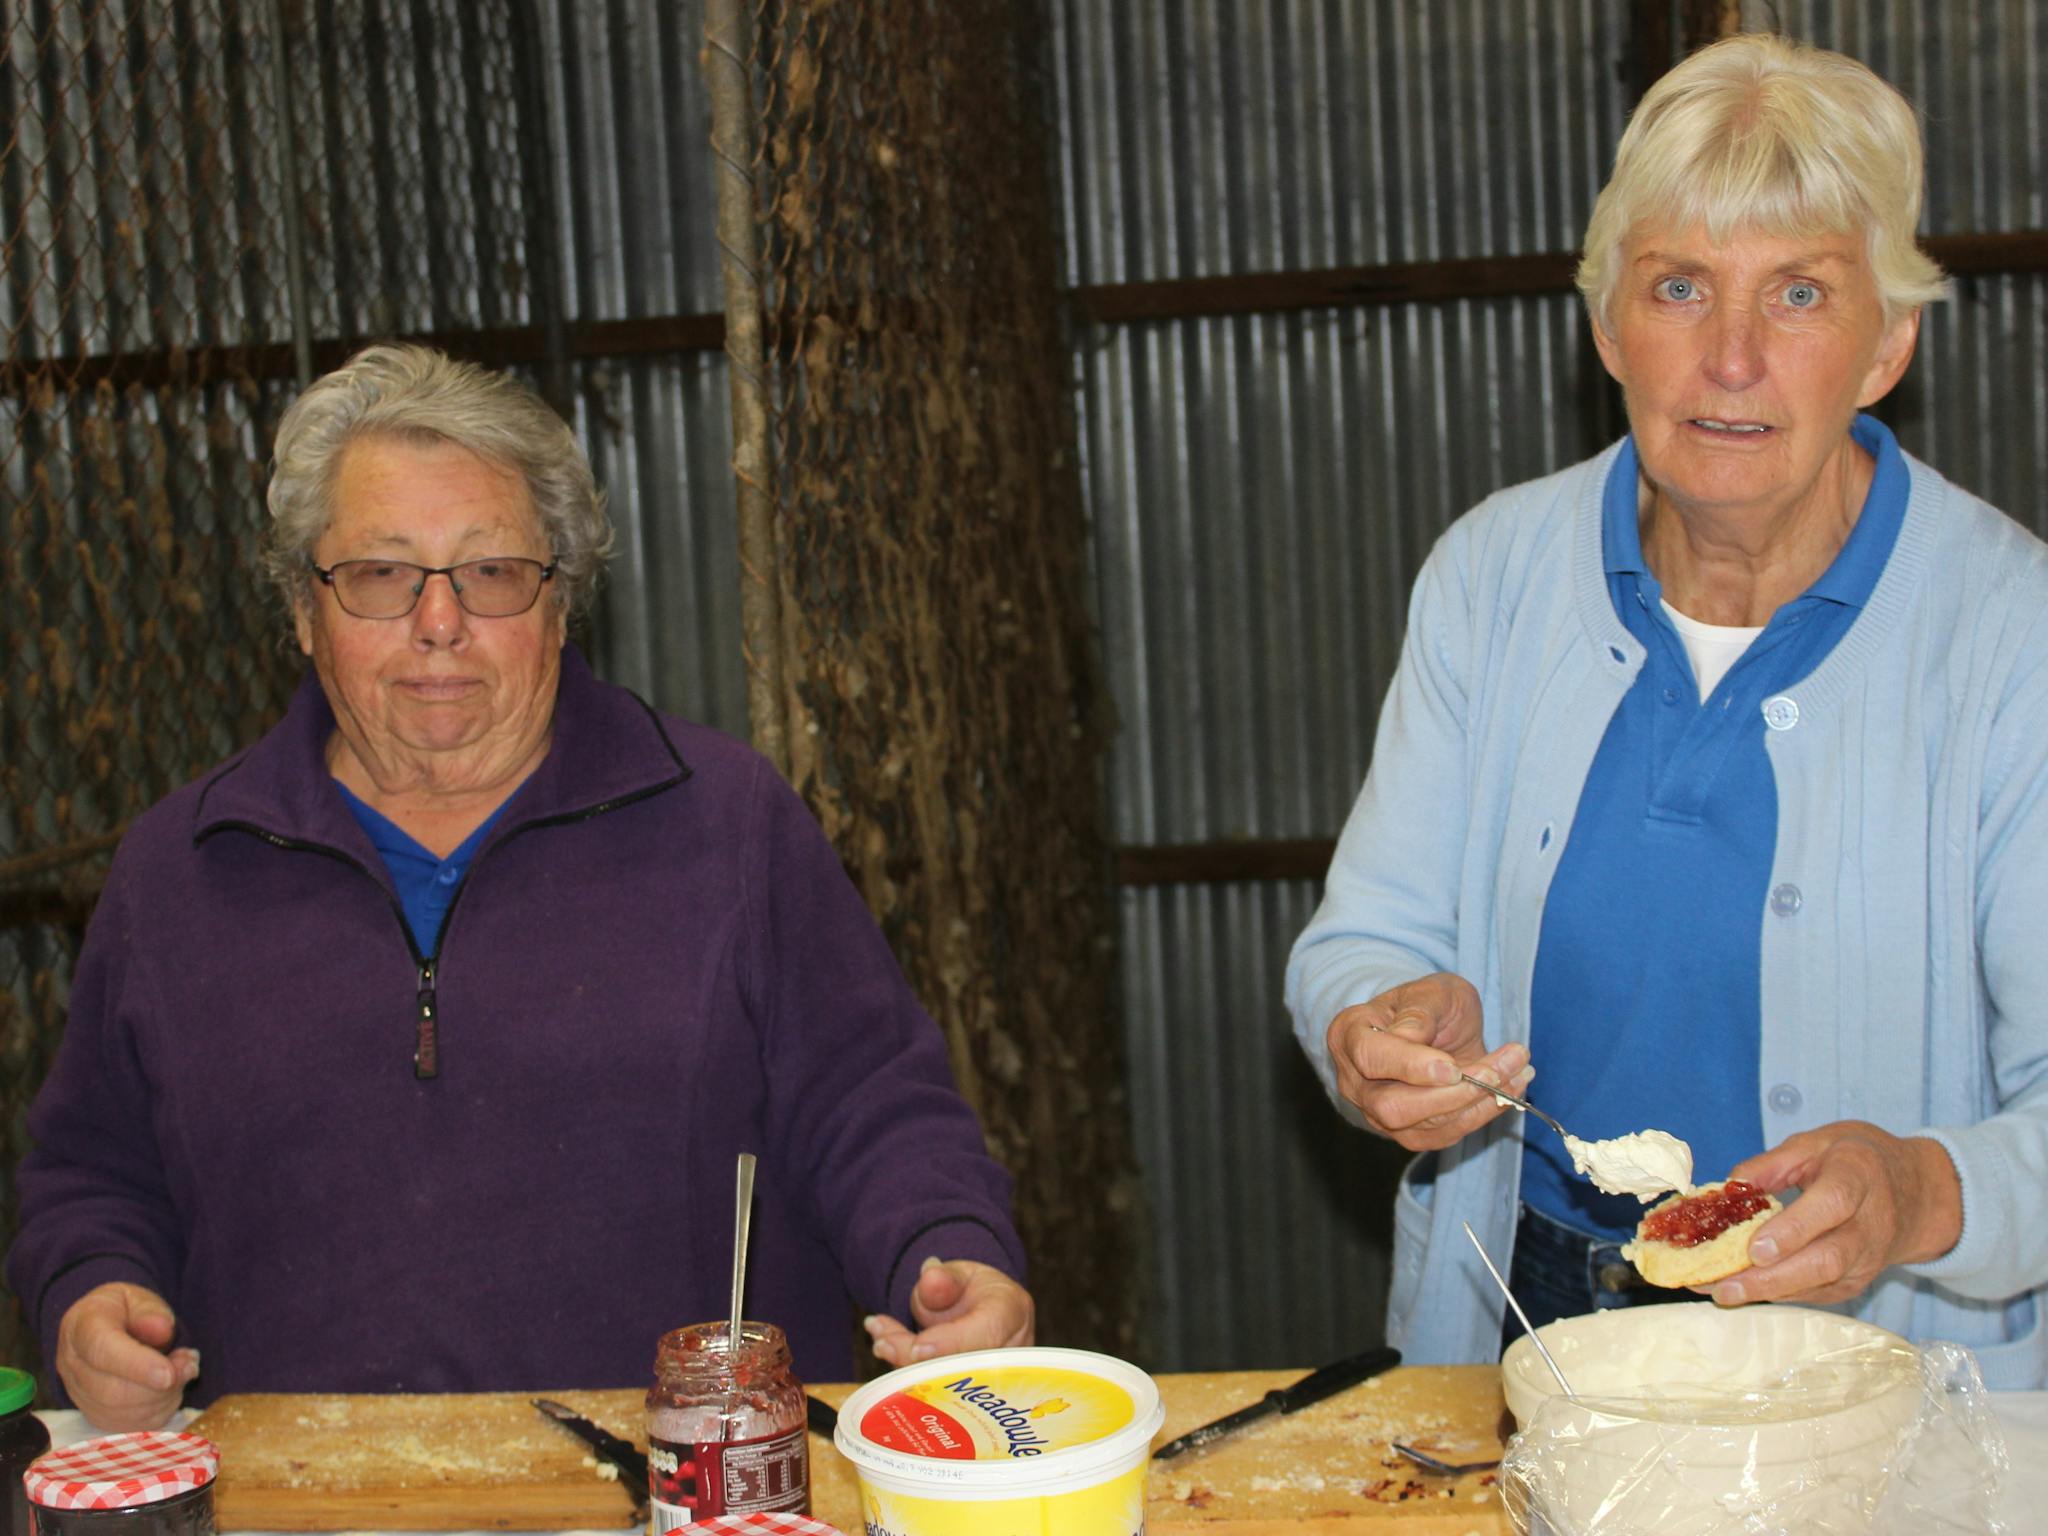 Enjoy homemade scones in the shearing shed